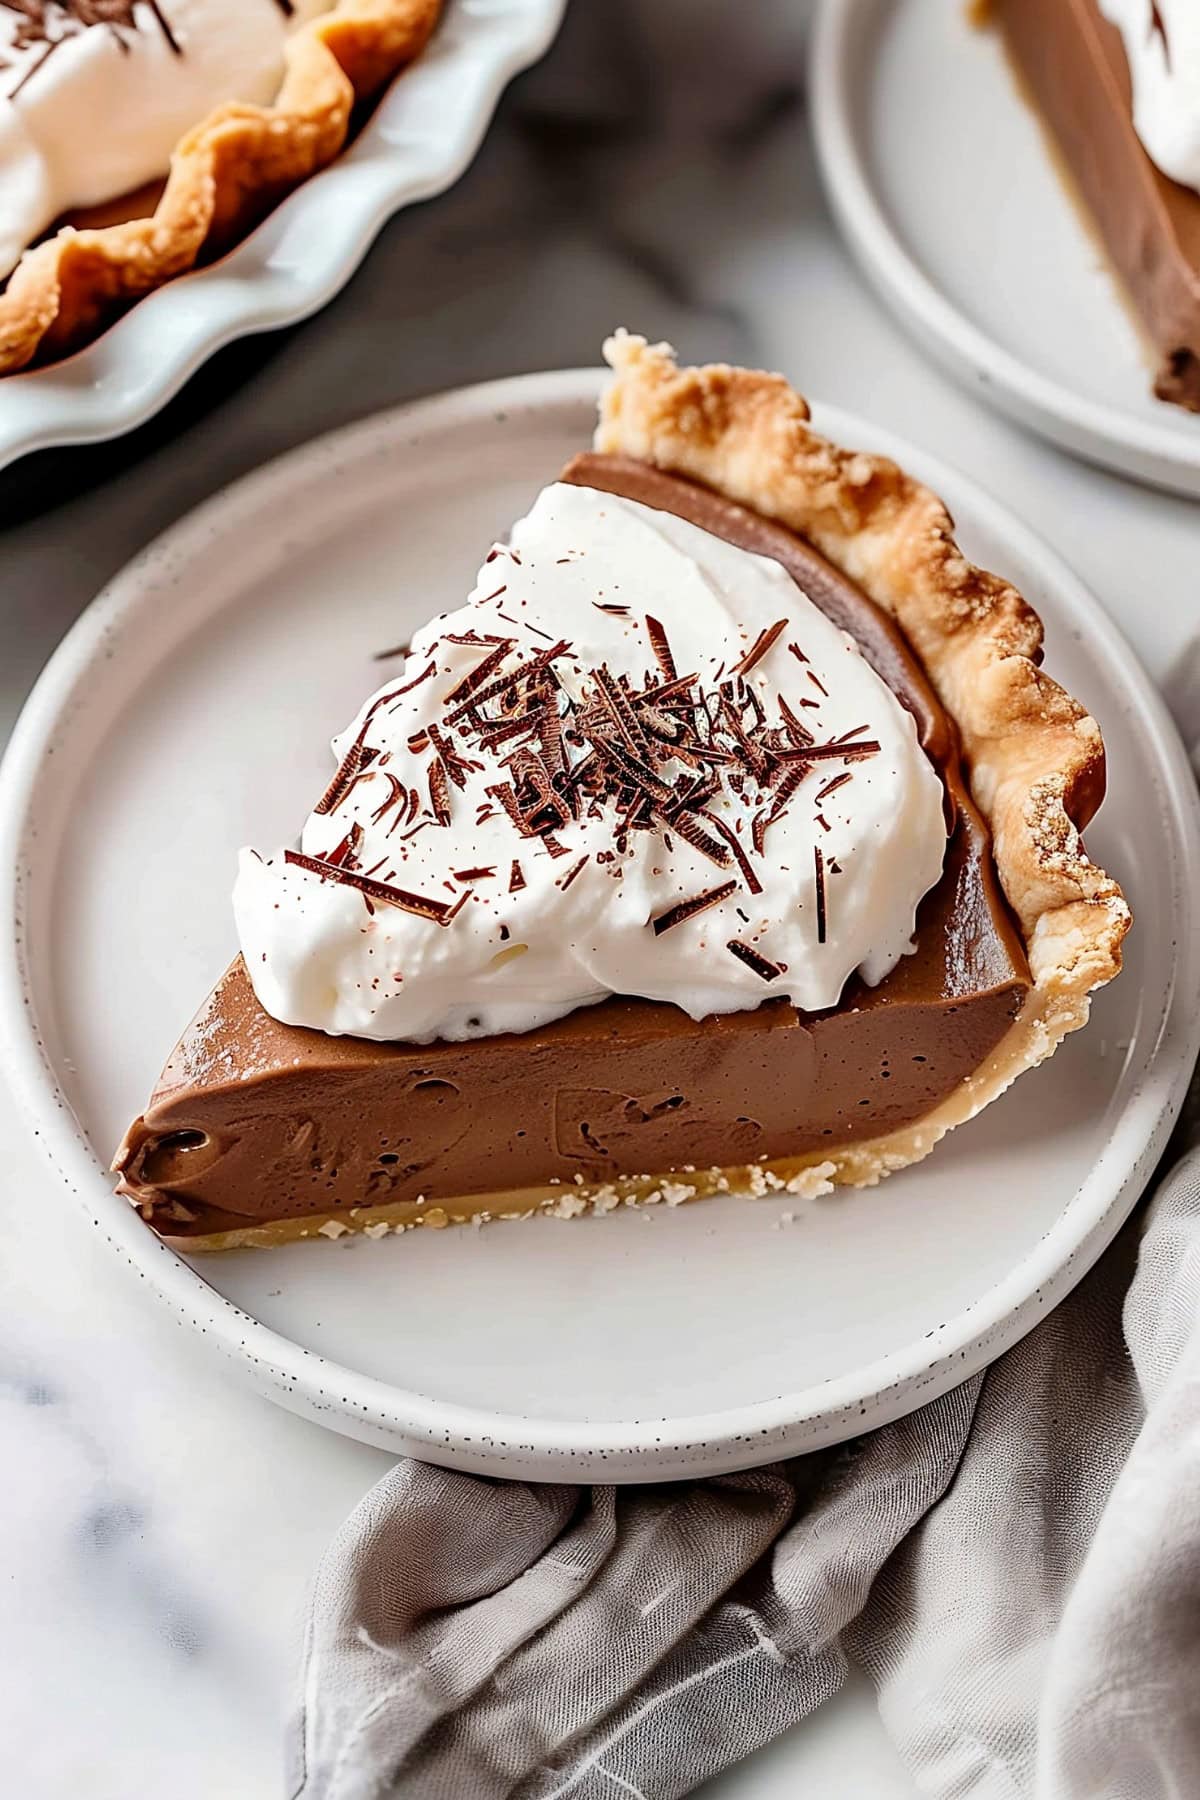 Sliced French silk pie topped with whipped cream and chocolate shavings